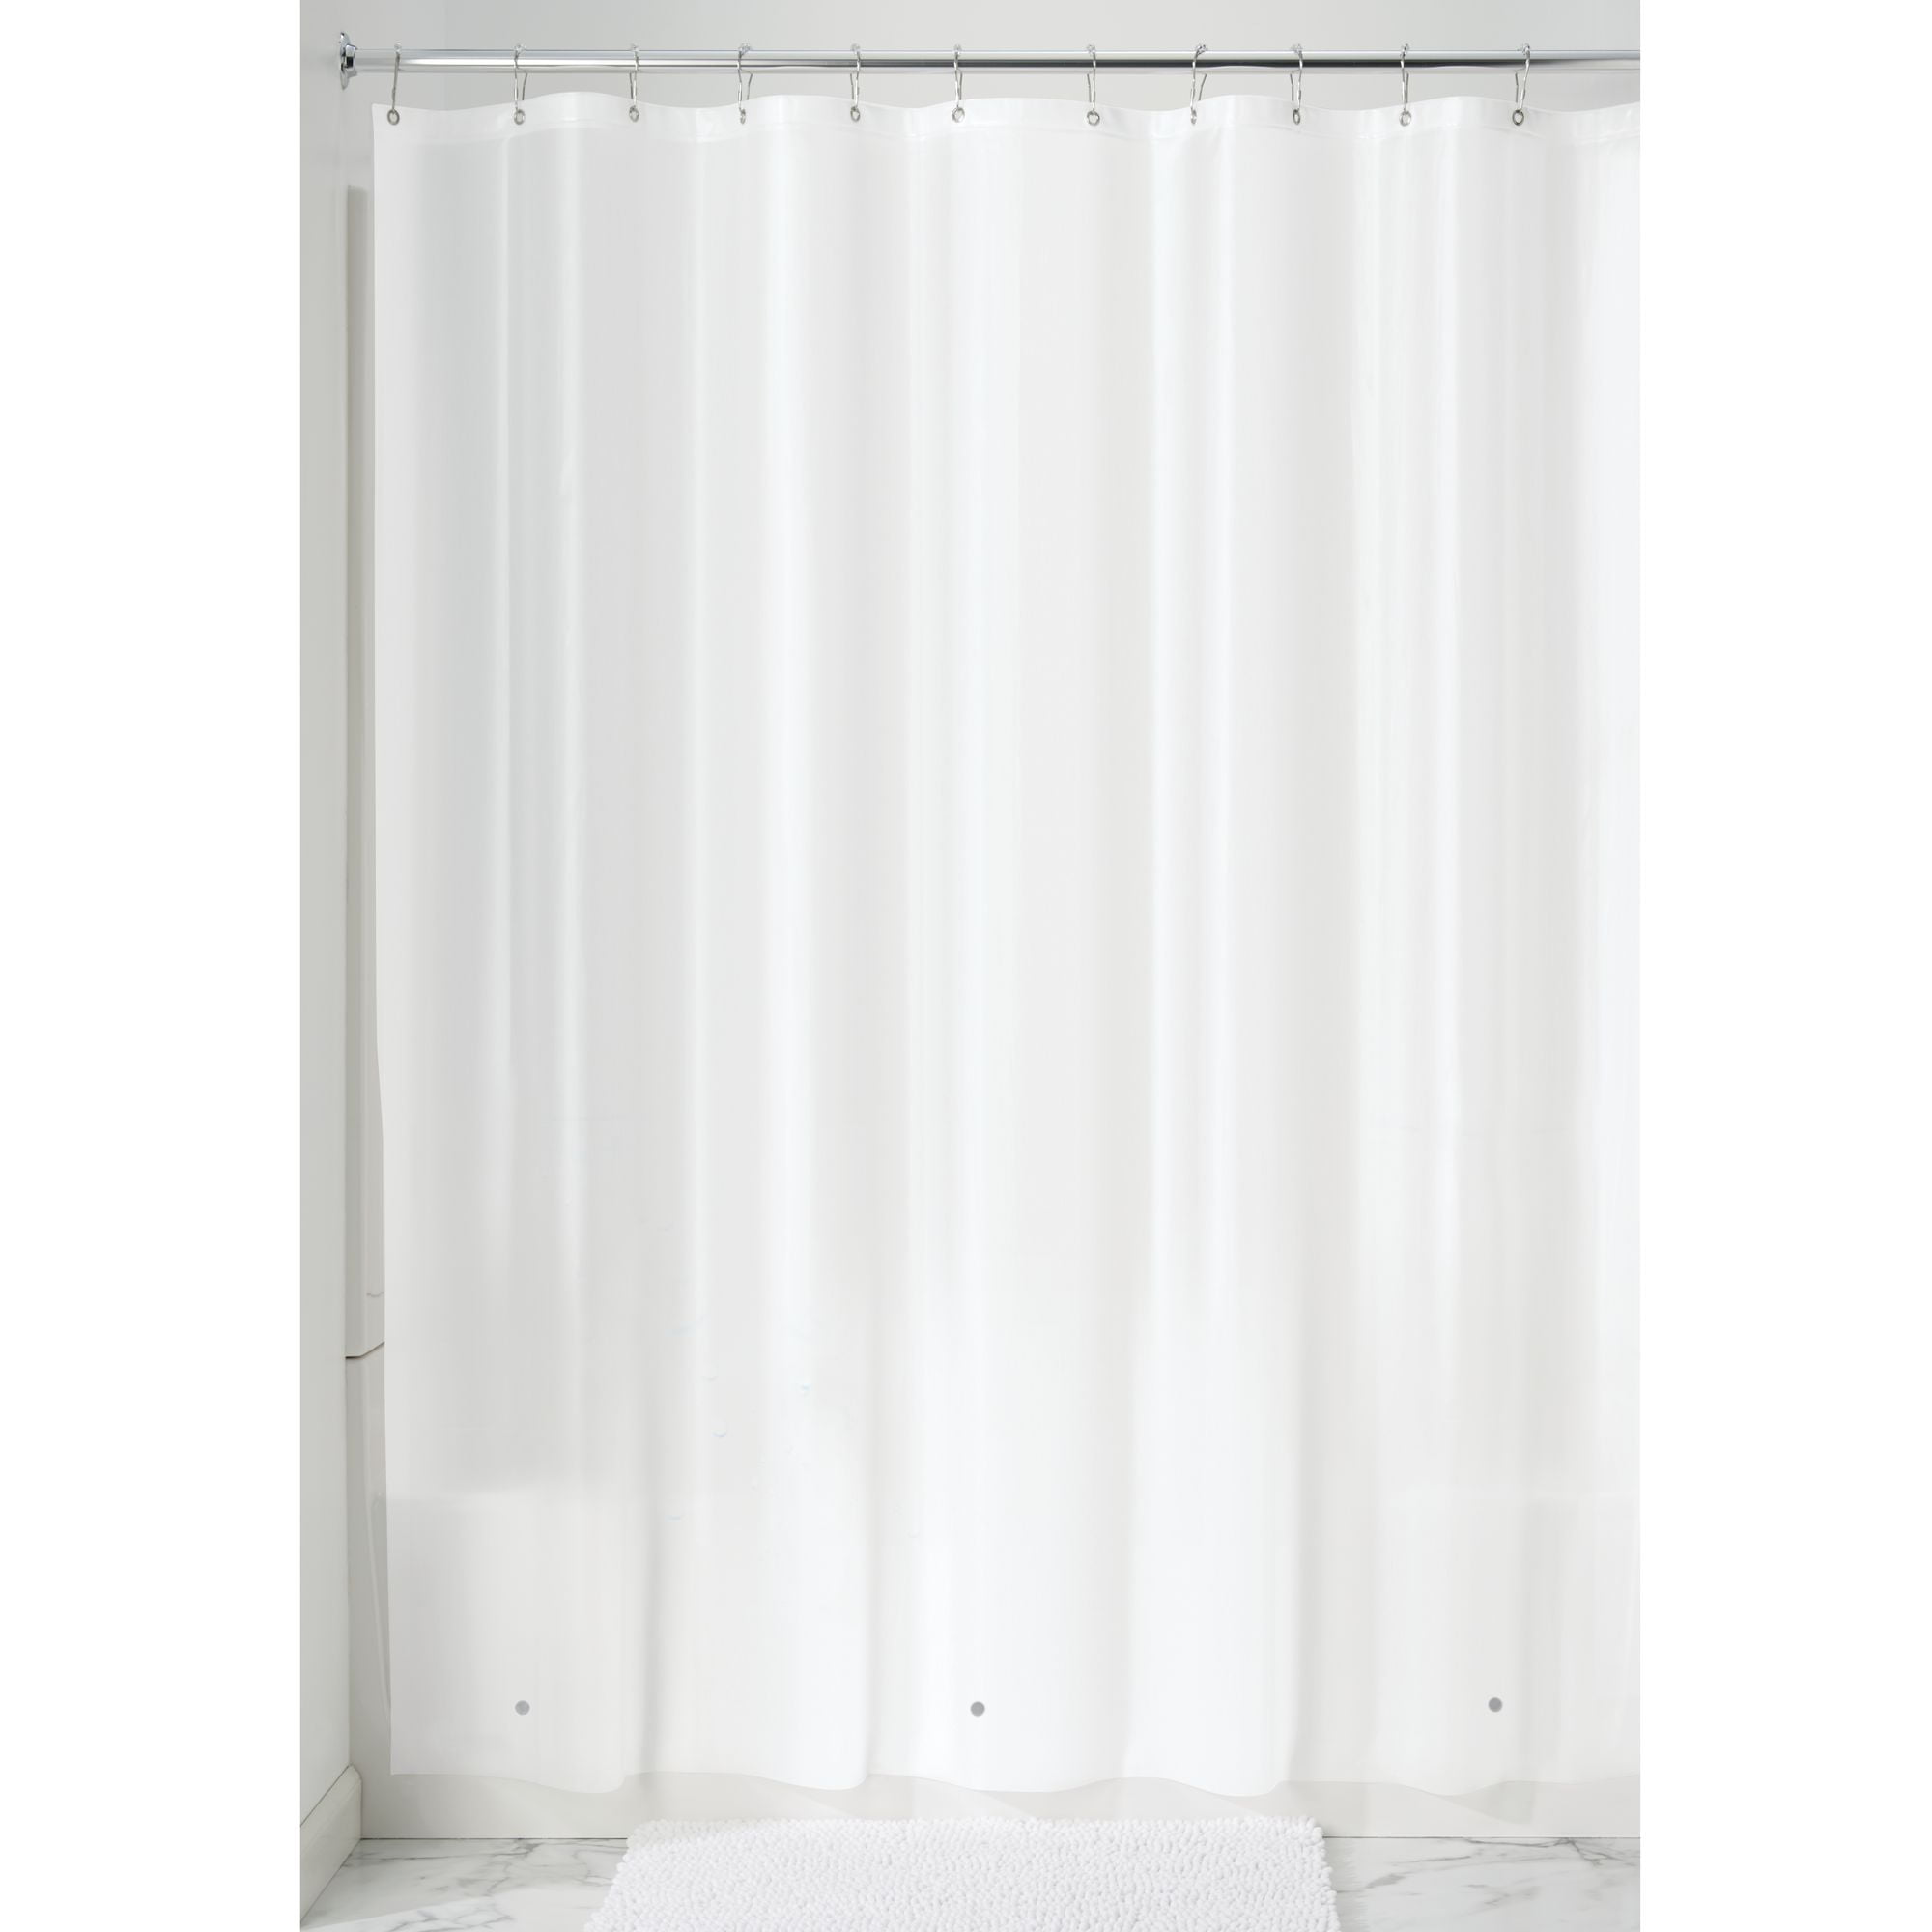 Details about   Shower Curtain Liner Lightweight with Magnets and 12 Grommet Holes 72x78 